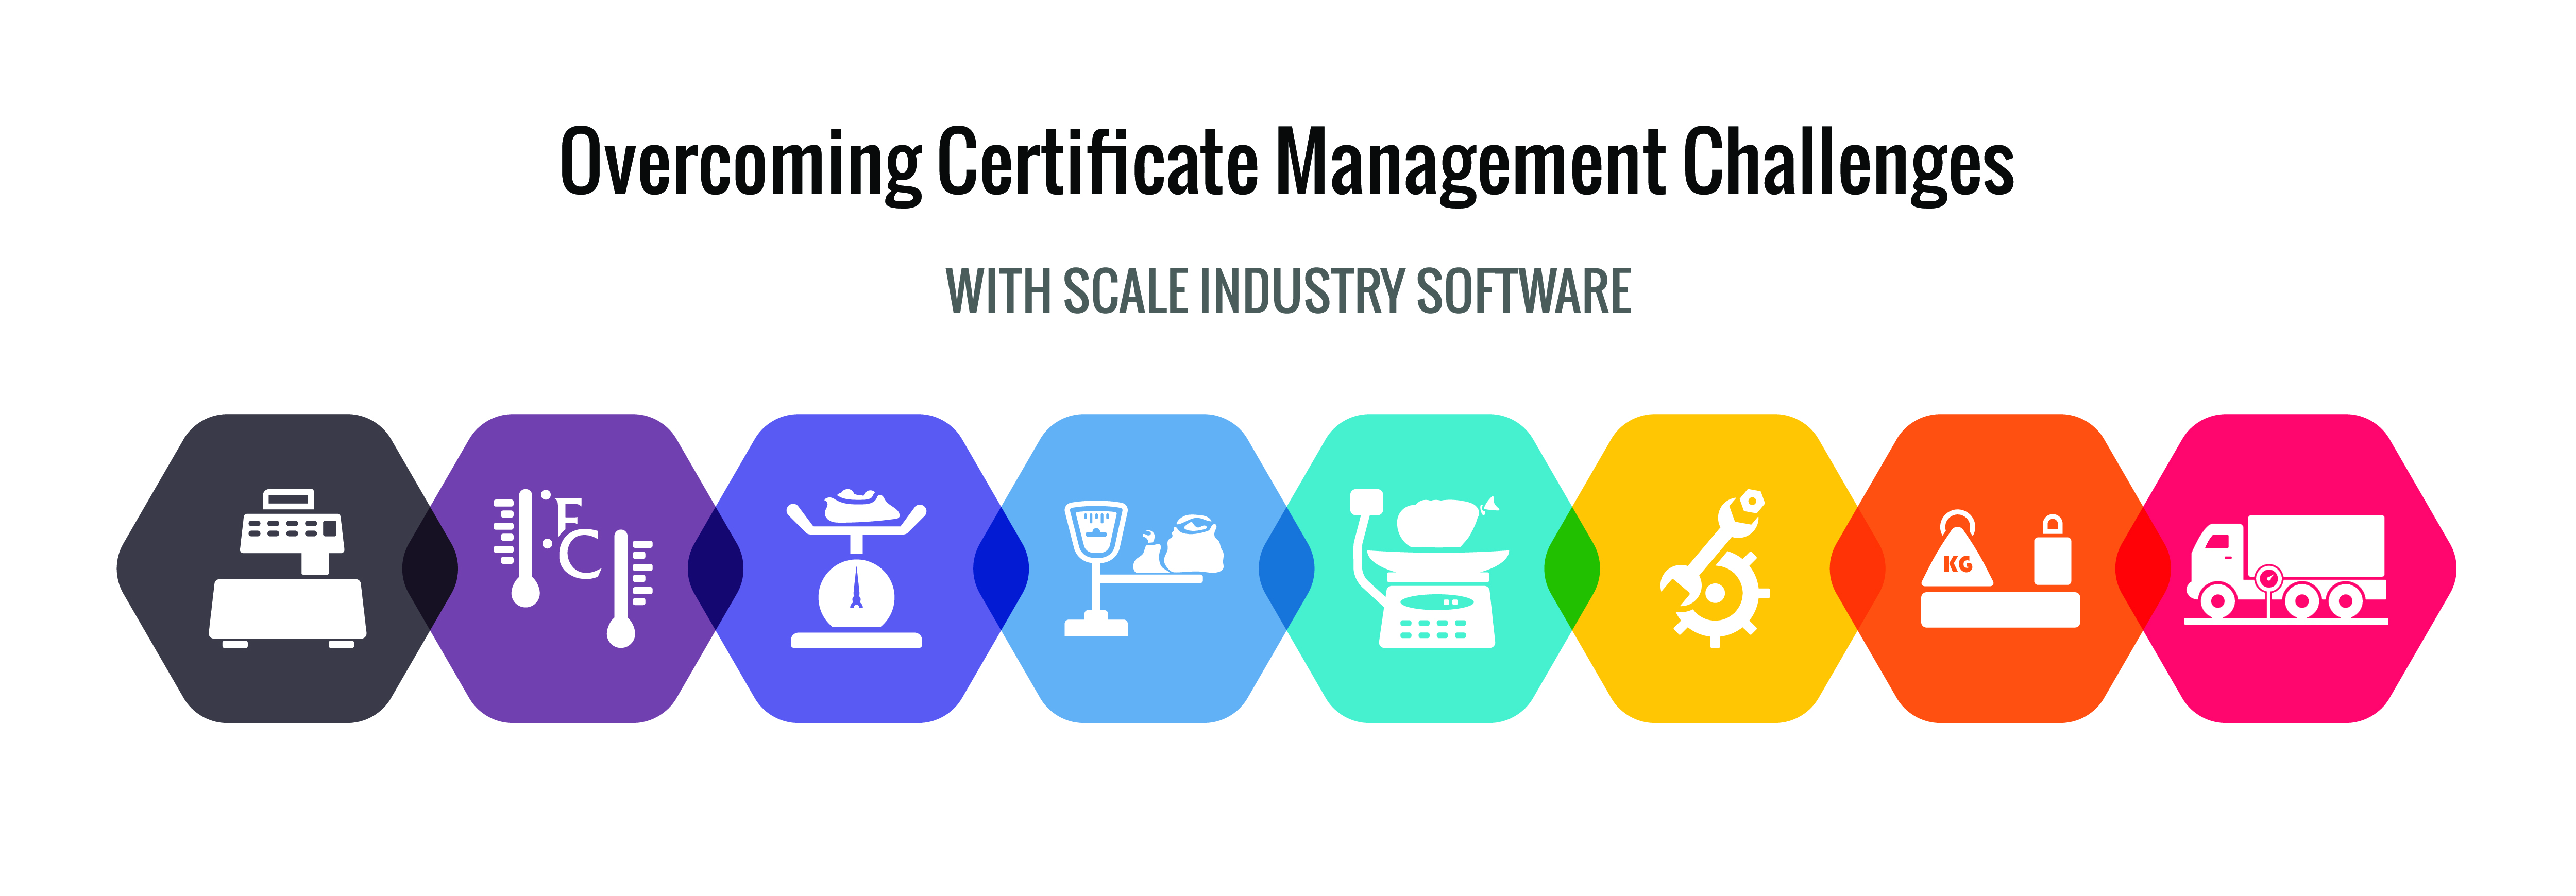 Overcoming Certificate Management Challenges